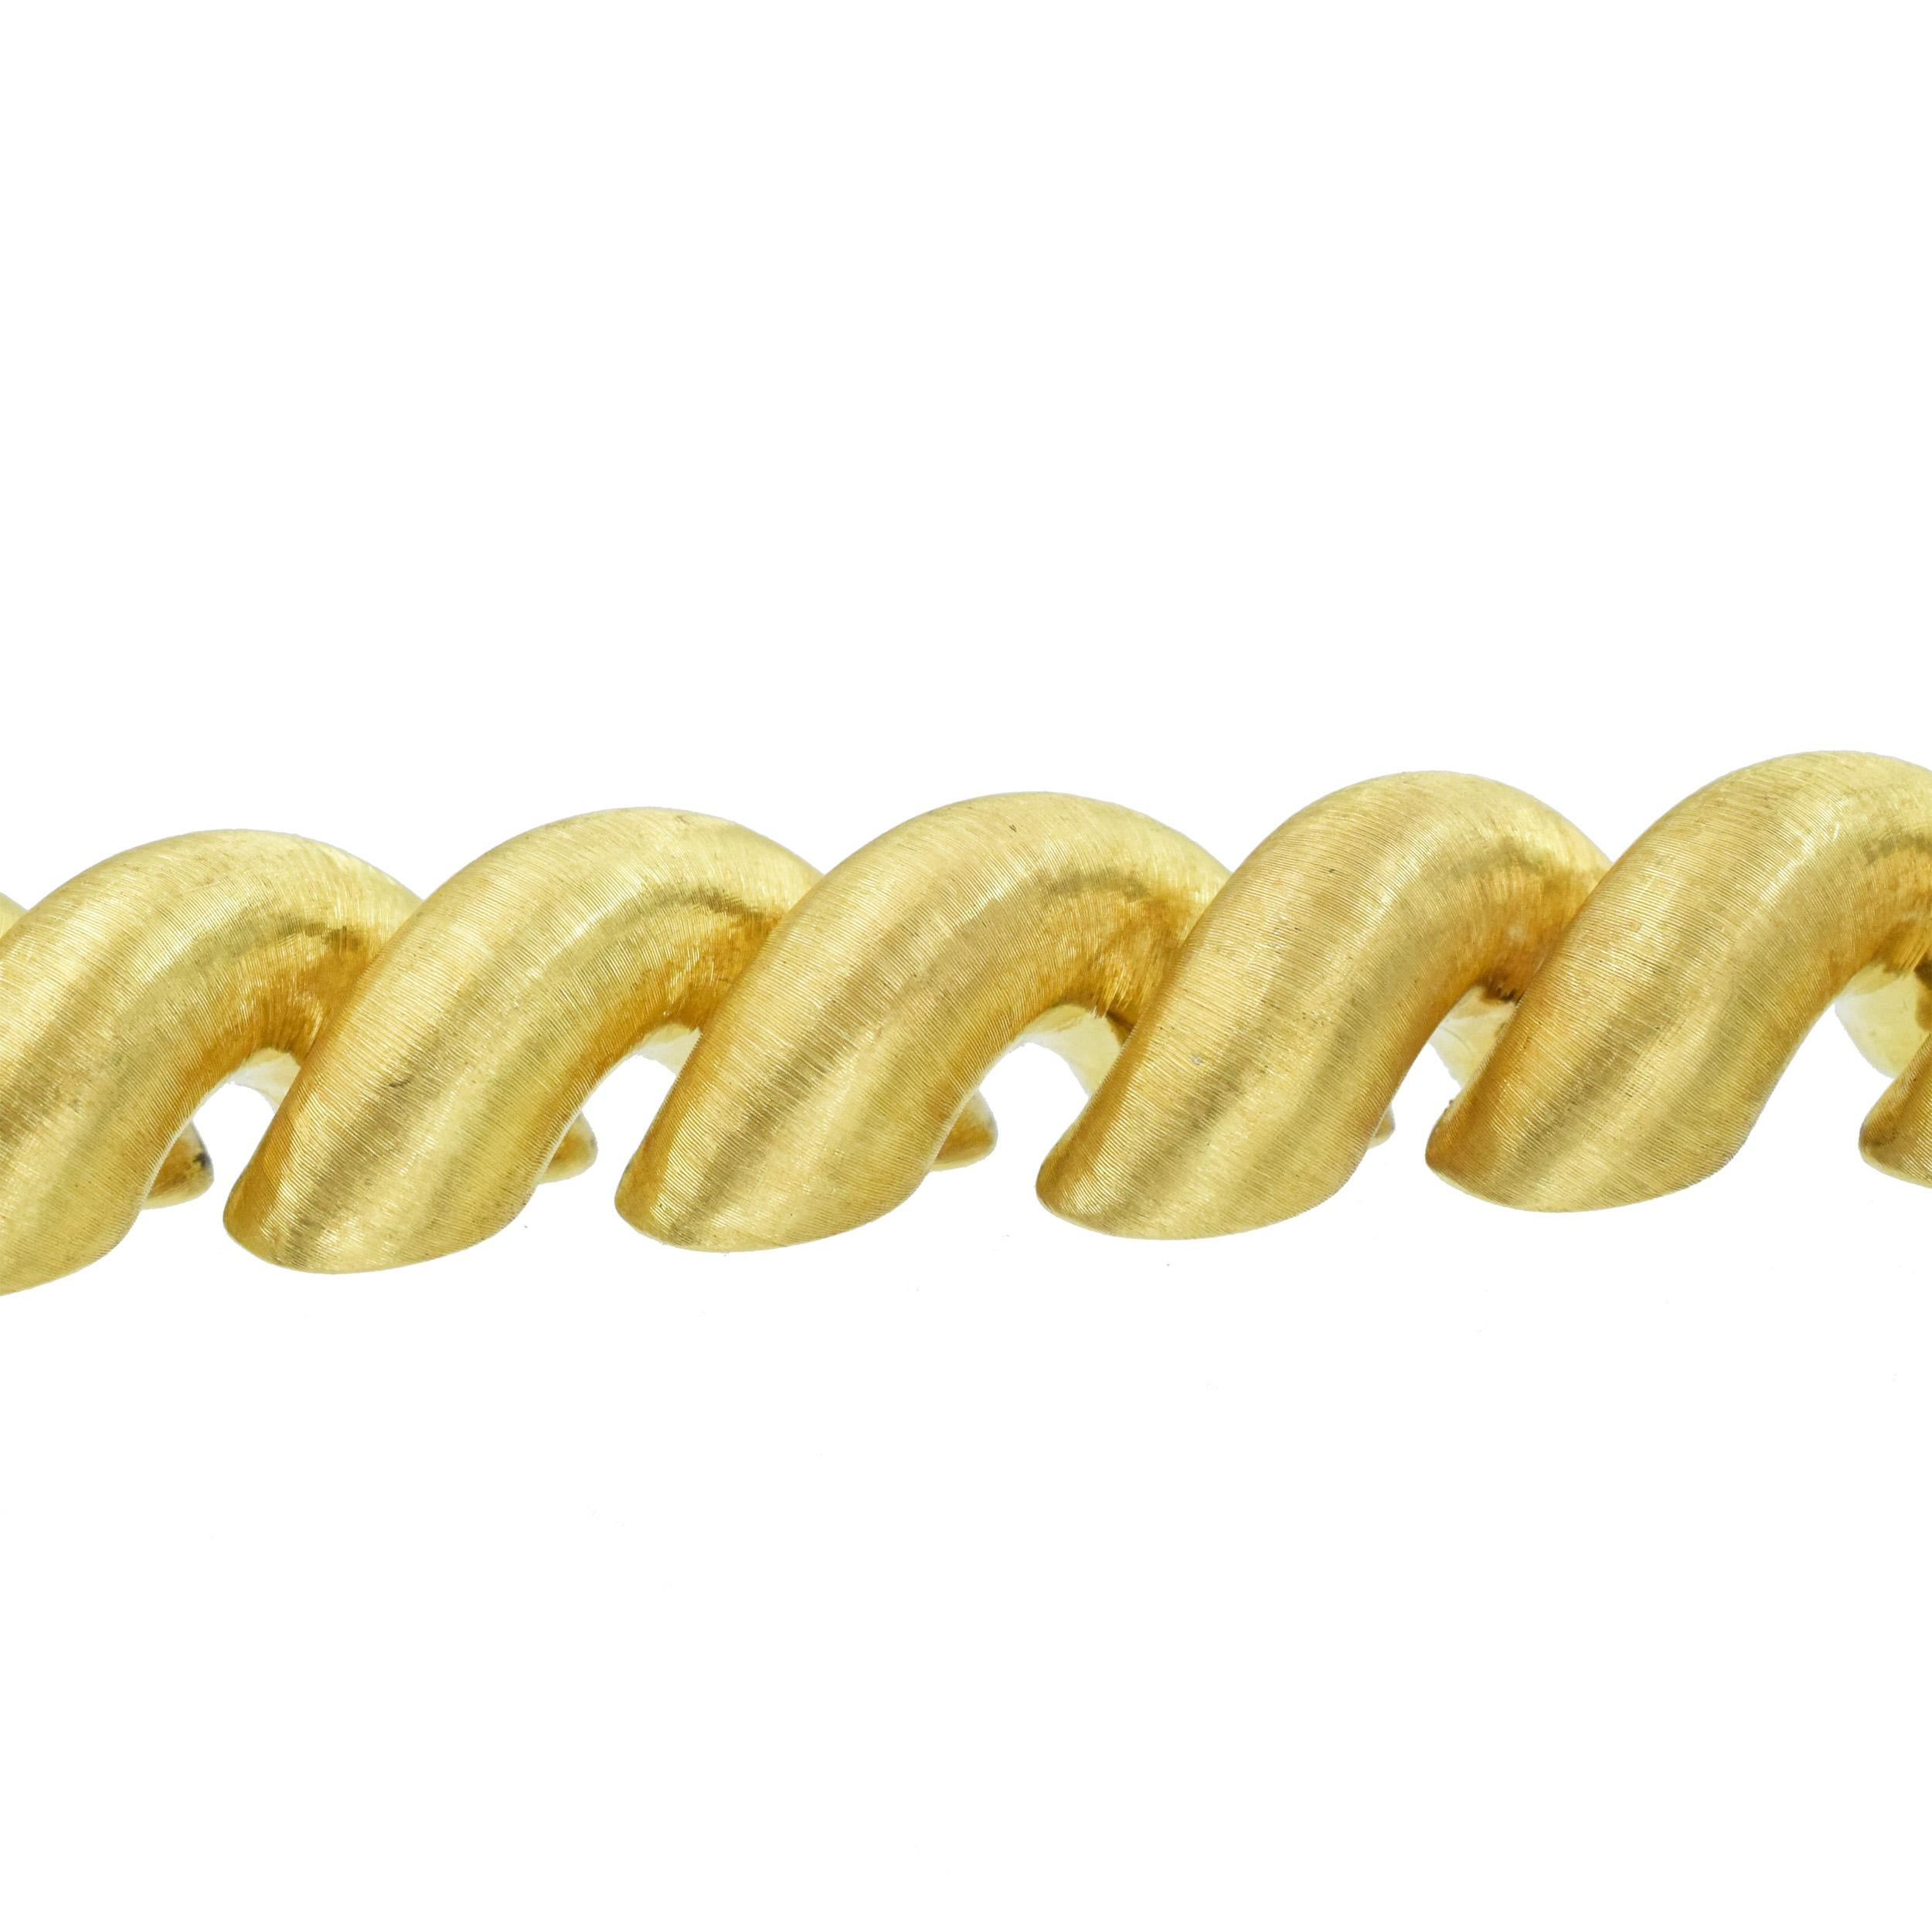 Buccellati 'San Marco' Link Macaroni Necklace In Excellent Condition For Sale In New York, NY